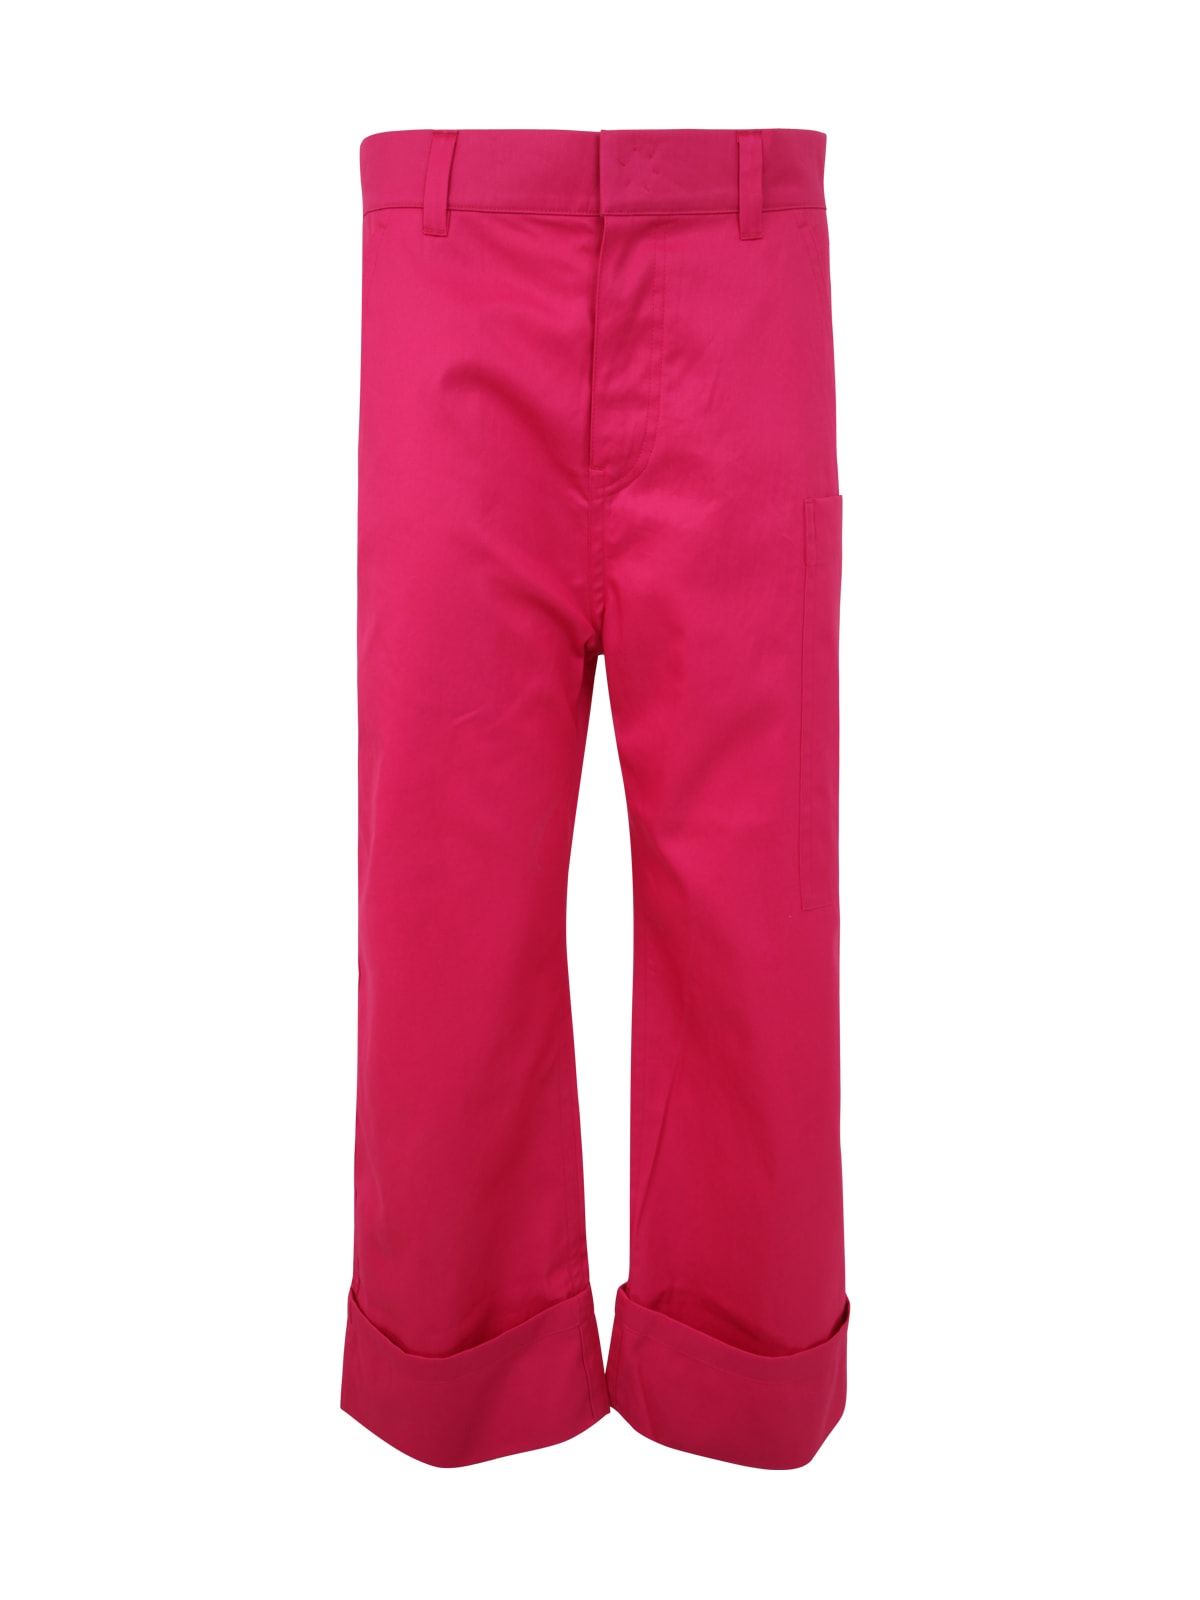 SOFIE D'HOORE PANTS WITH BIG PATCHED THIGH POCKET